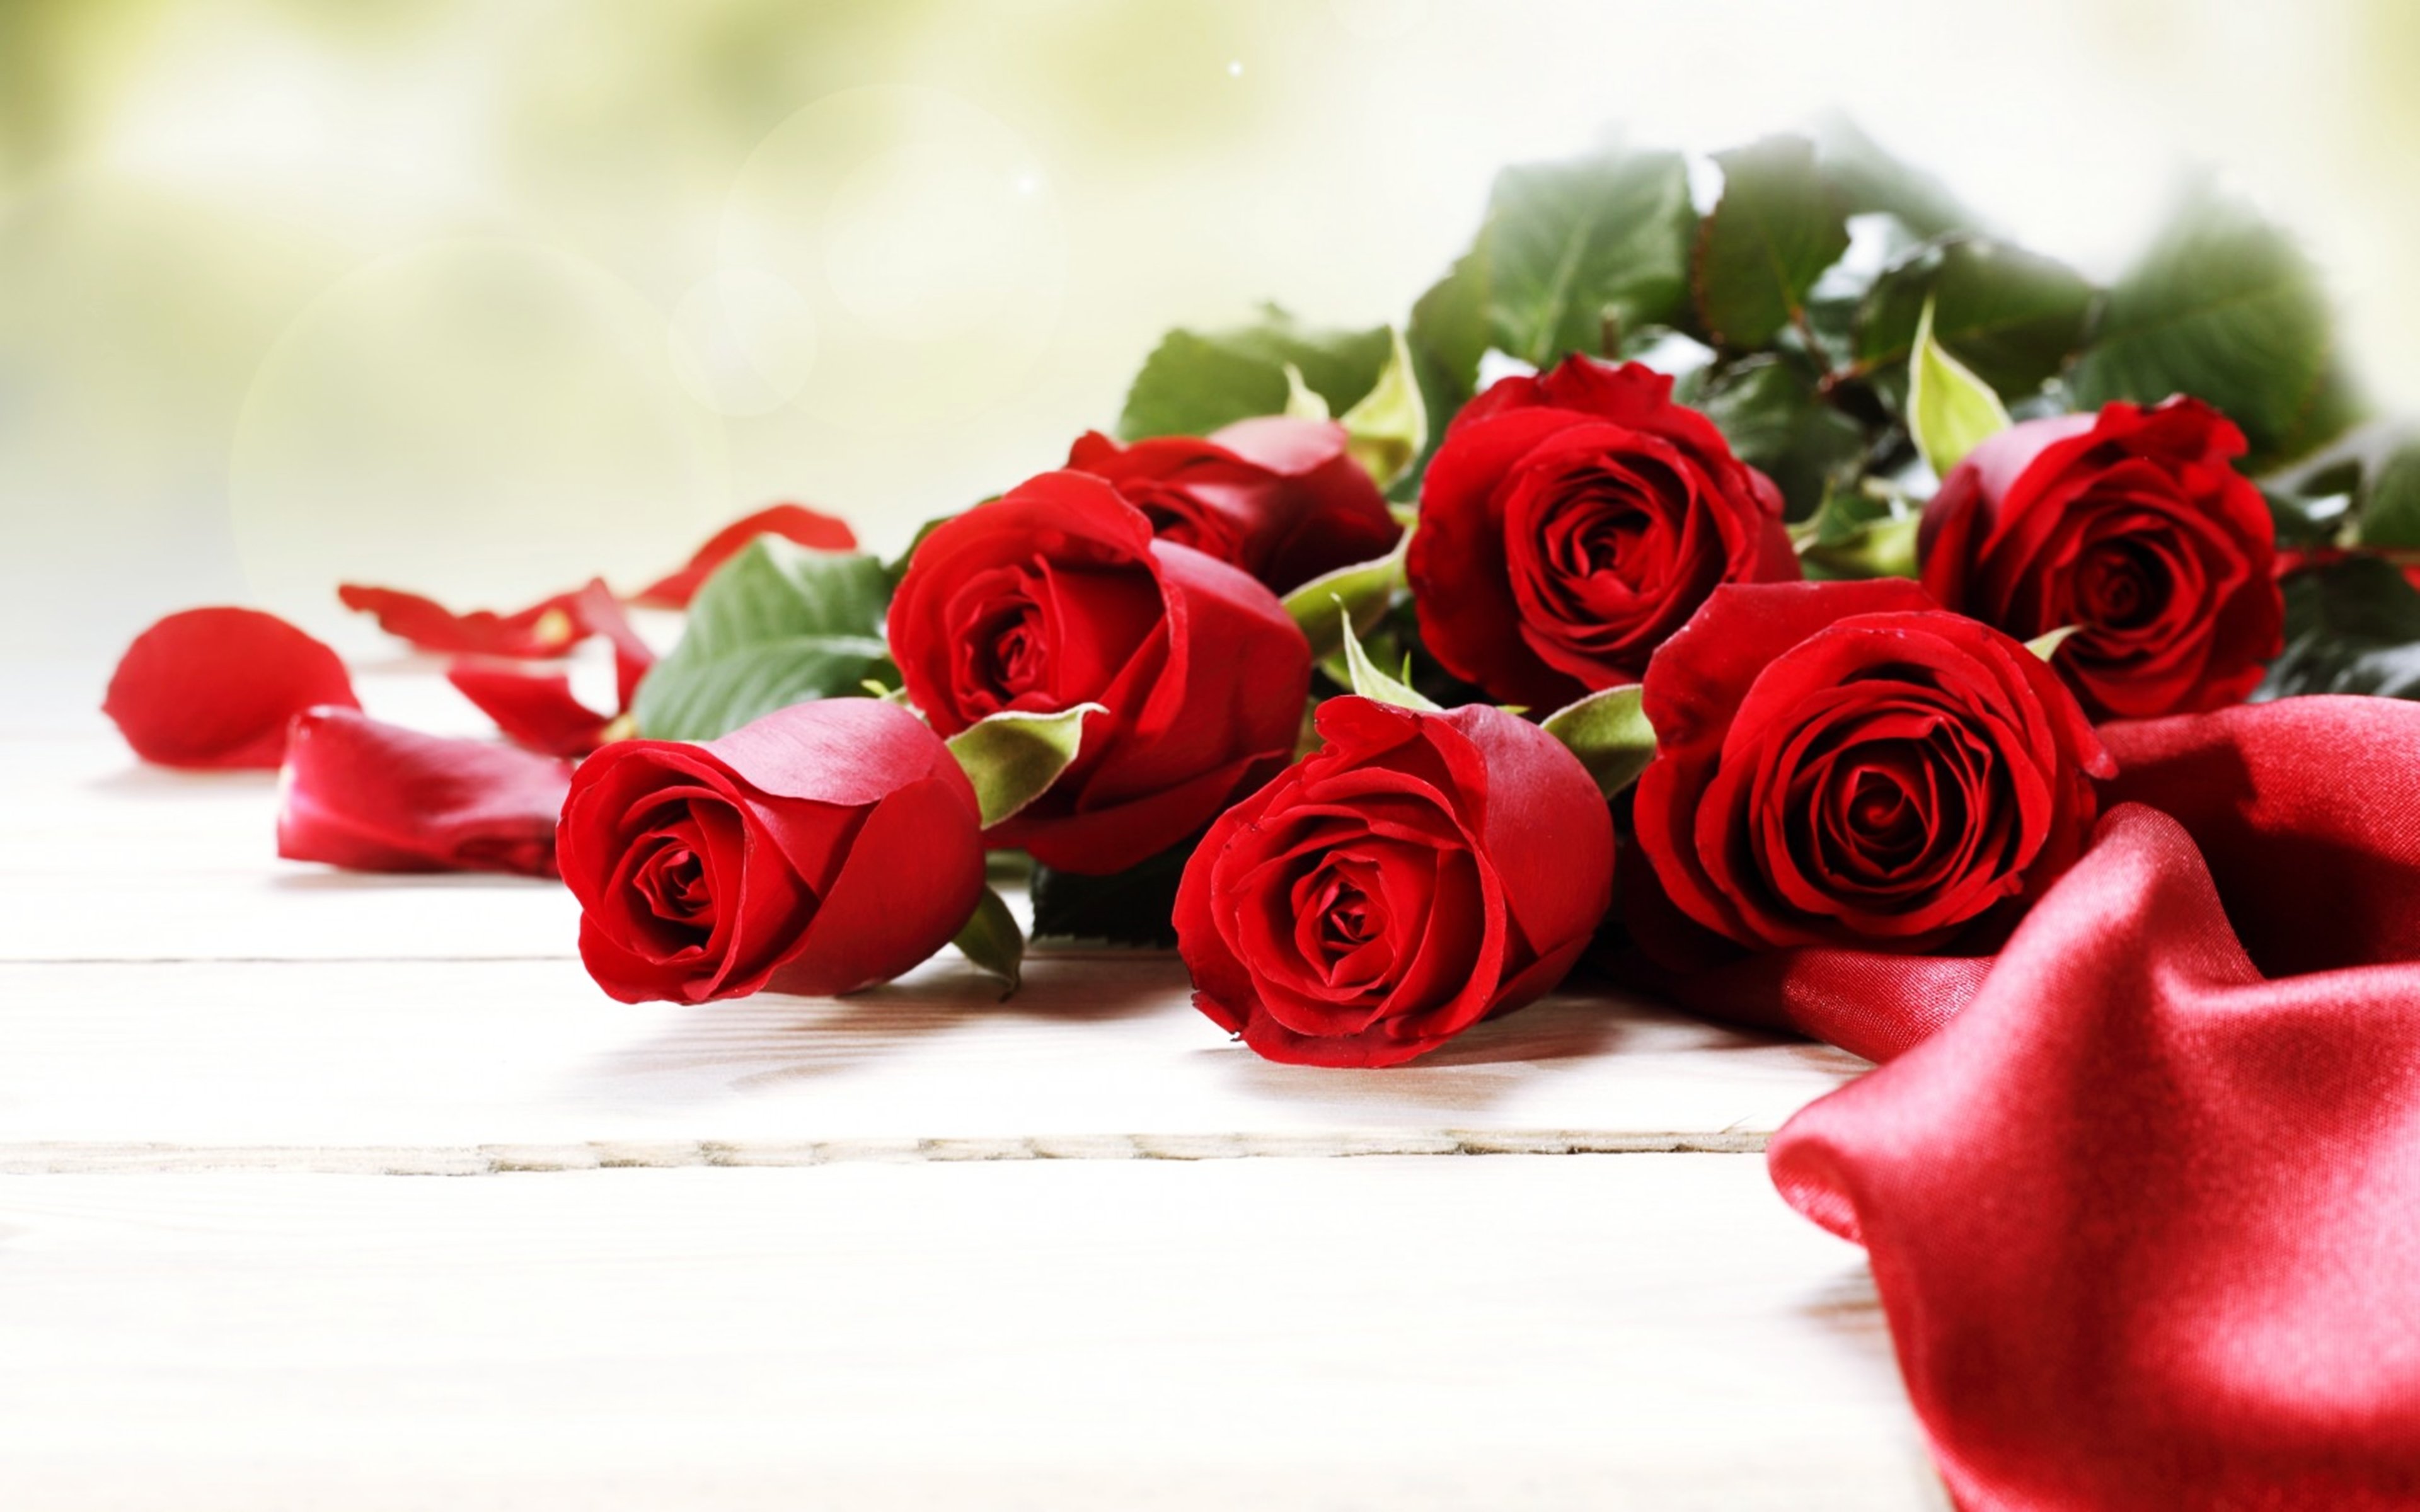 roses, Red, Flowers, Love, Romance, Emotions, 4you ...